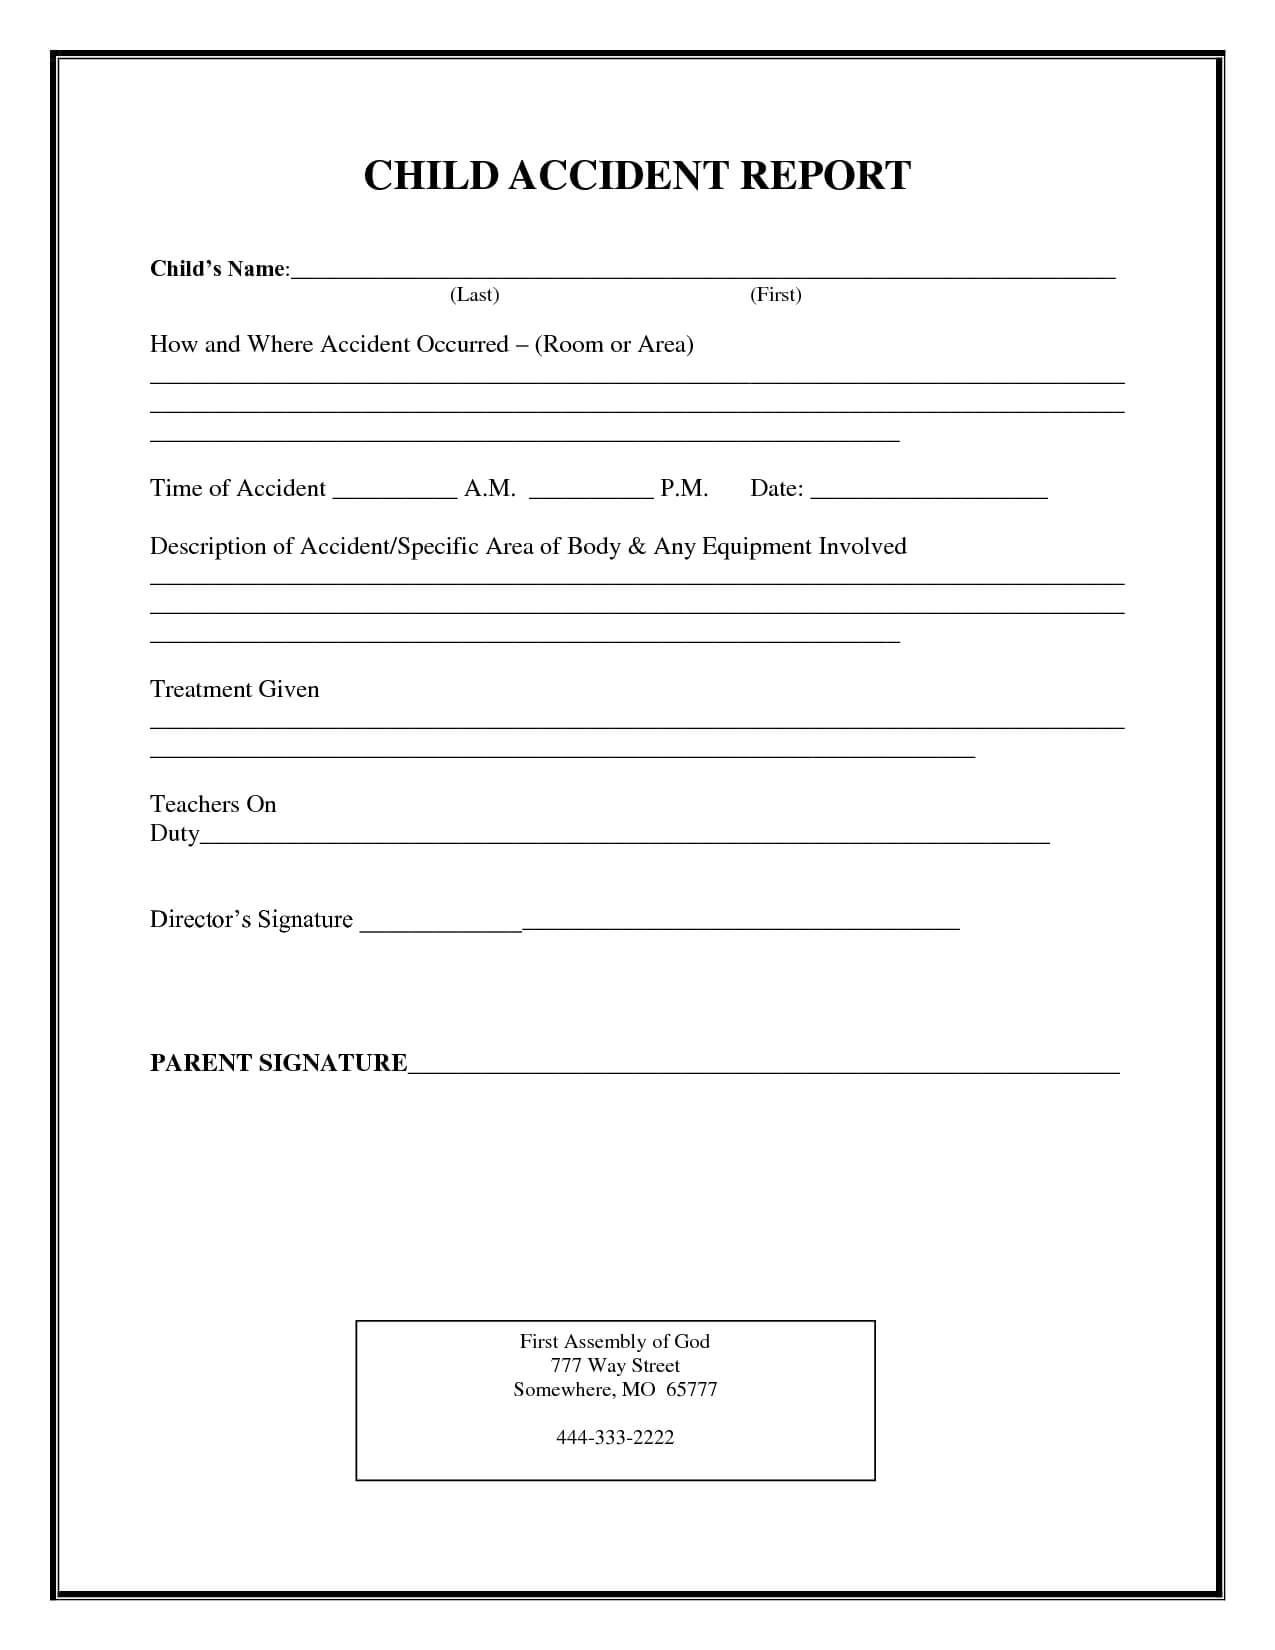 Incident Report Form Child Care | Child Accident Report Throughout Medication Incident Report Form Template